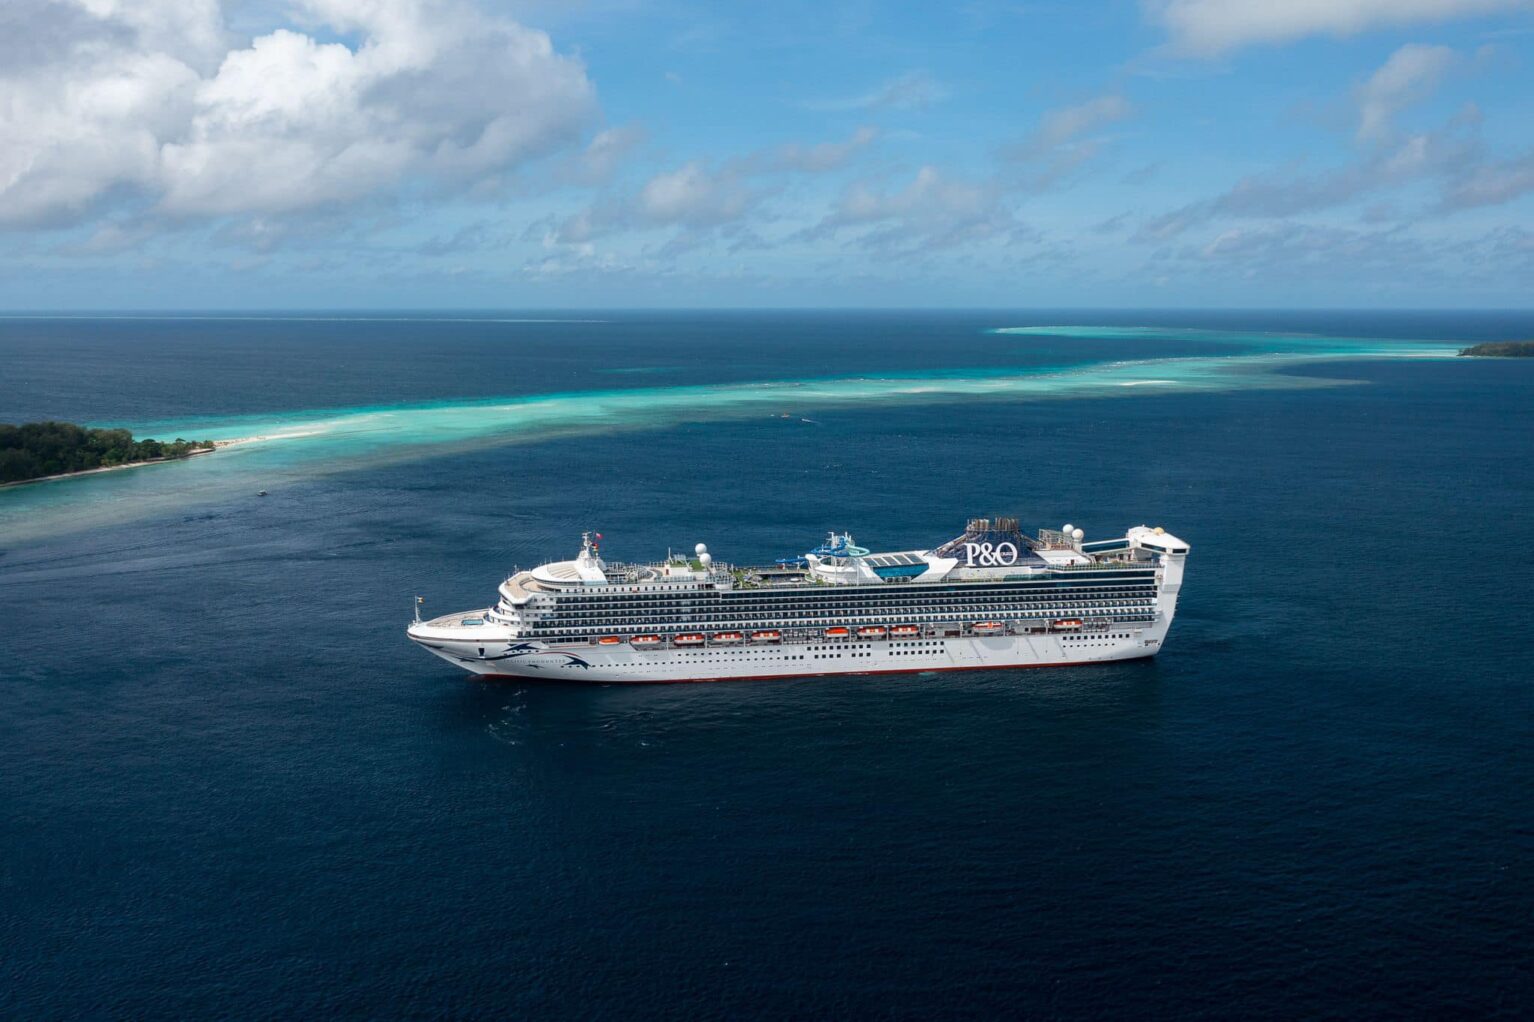 P&O sailing in the South Pacific